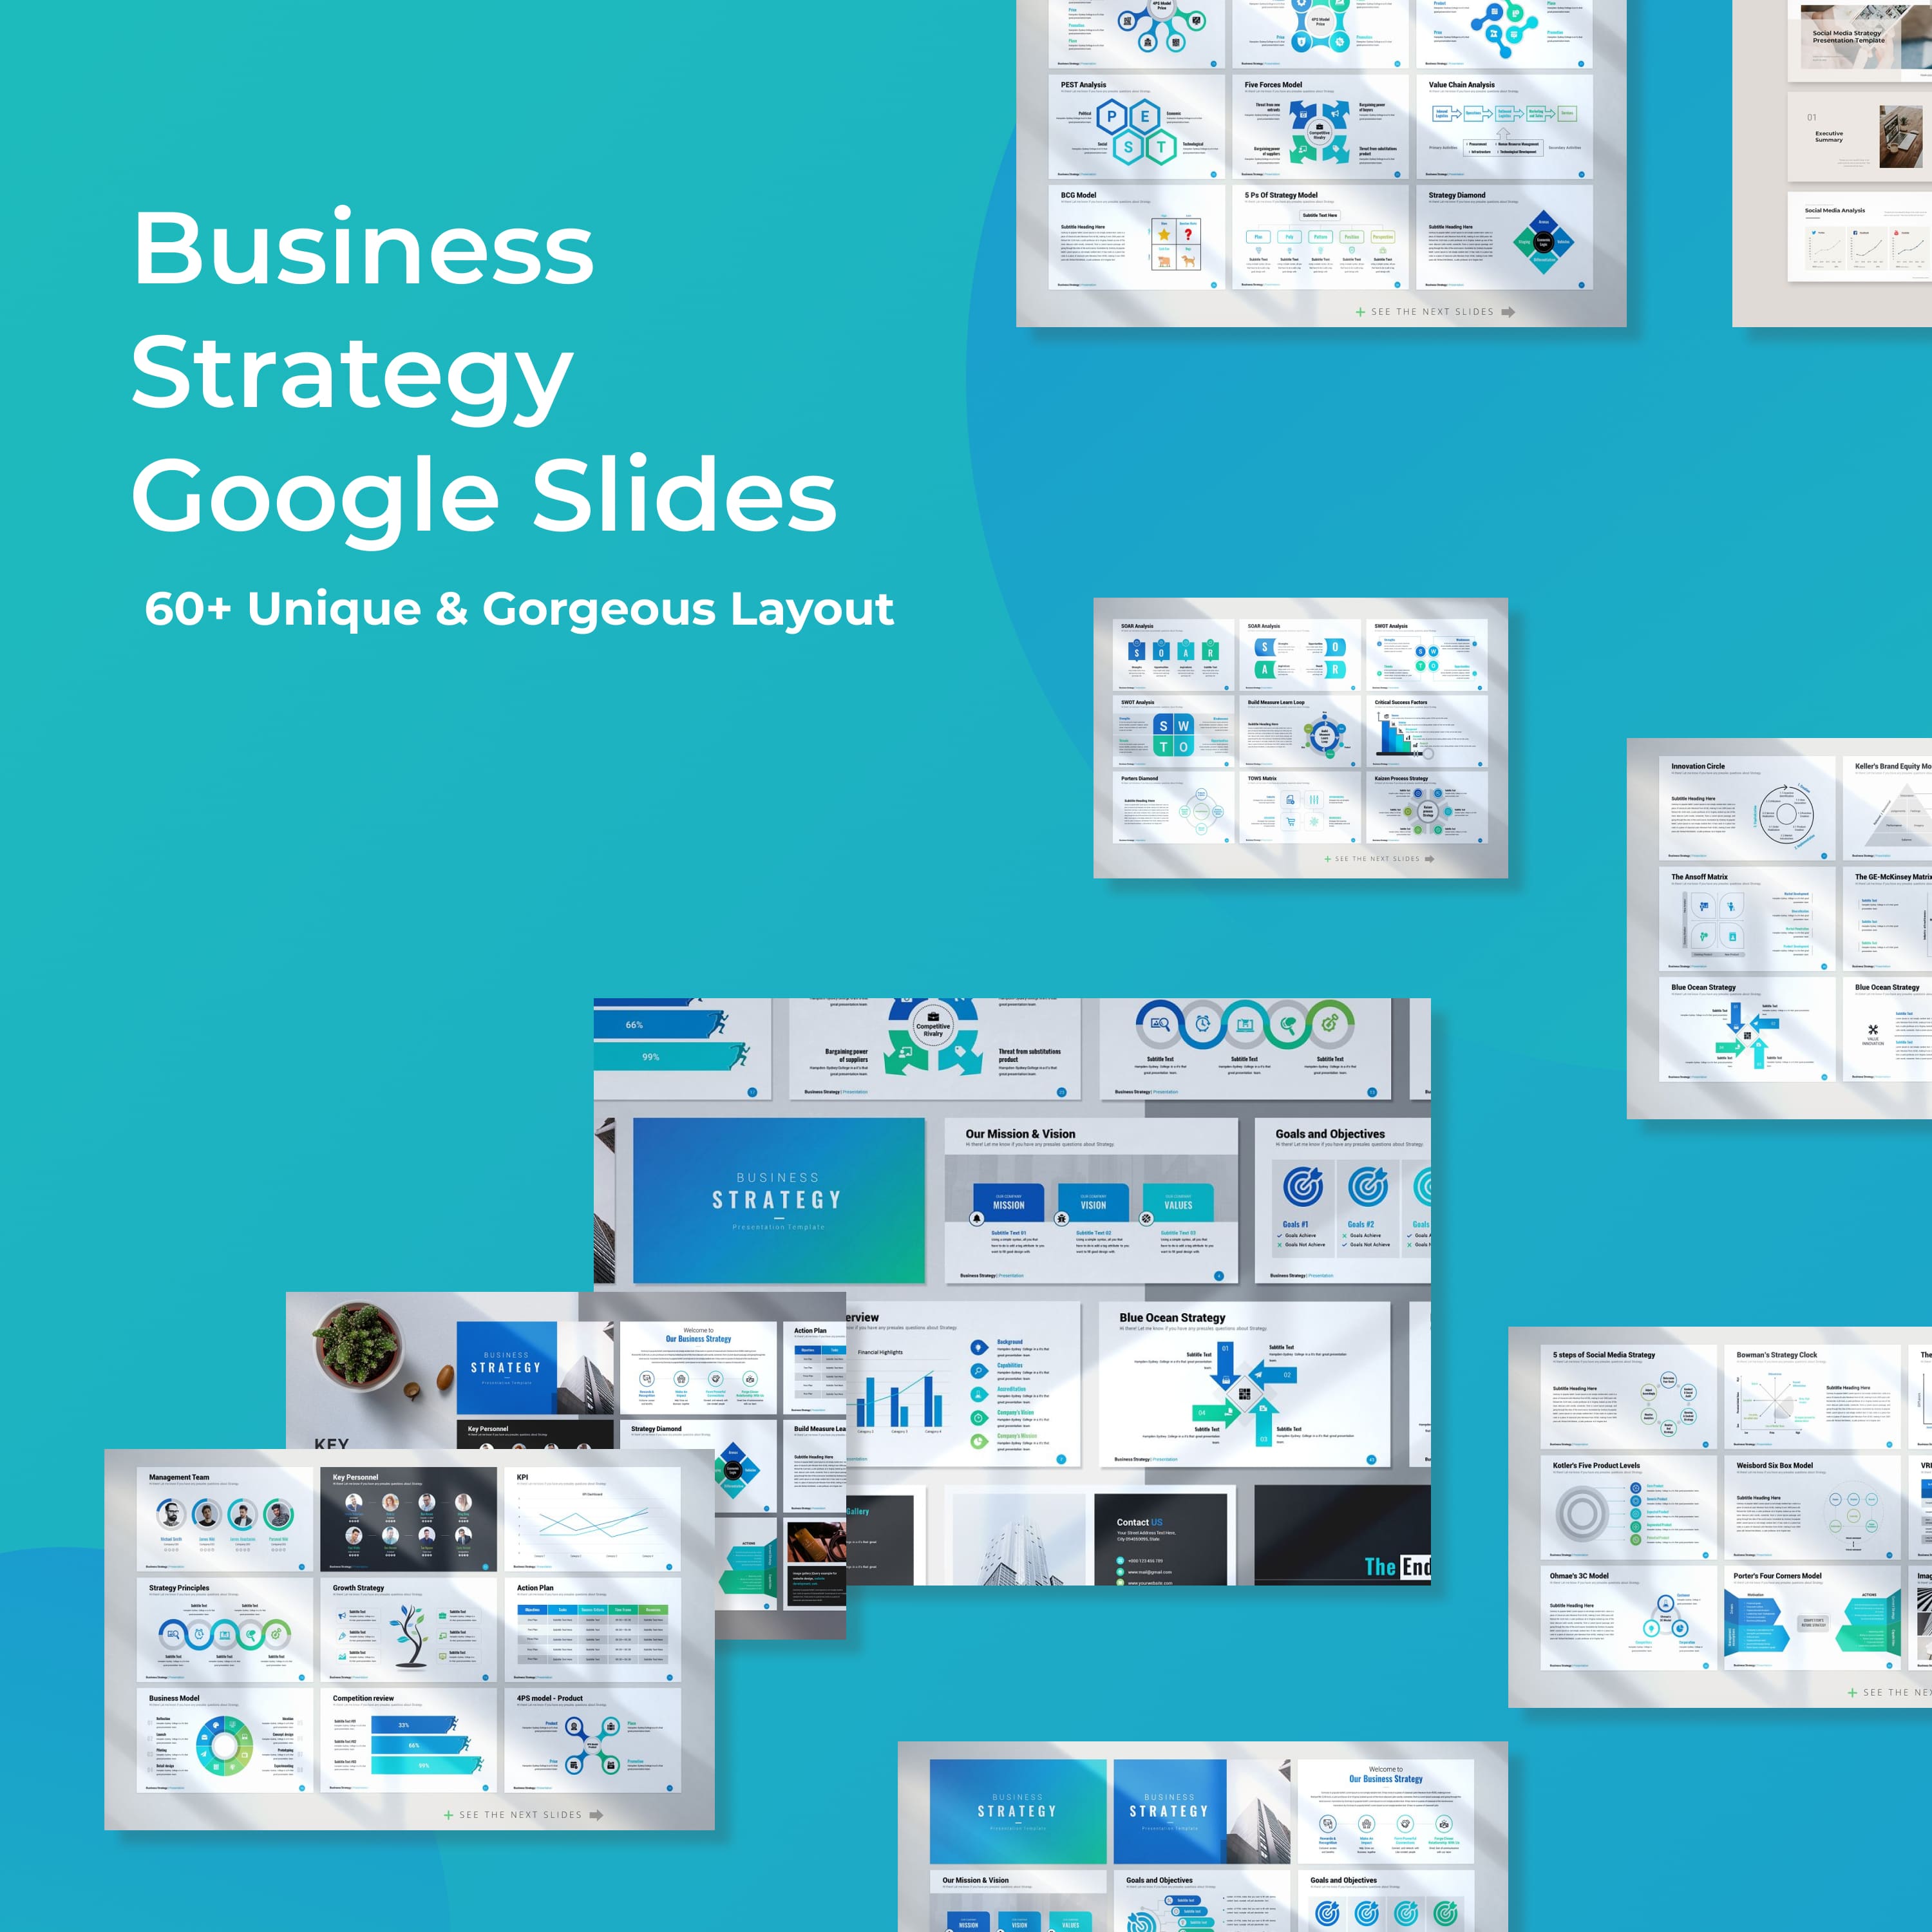 Business Strategy Google Slides cover.